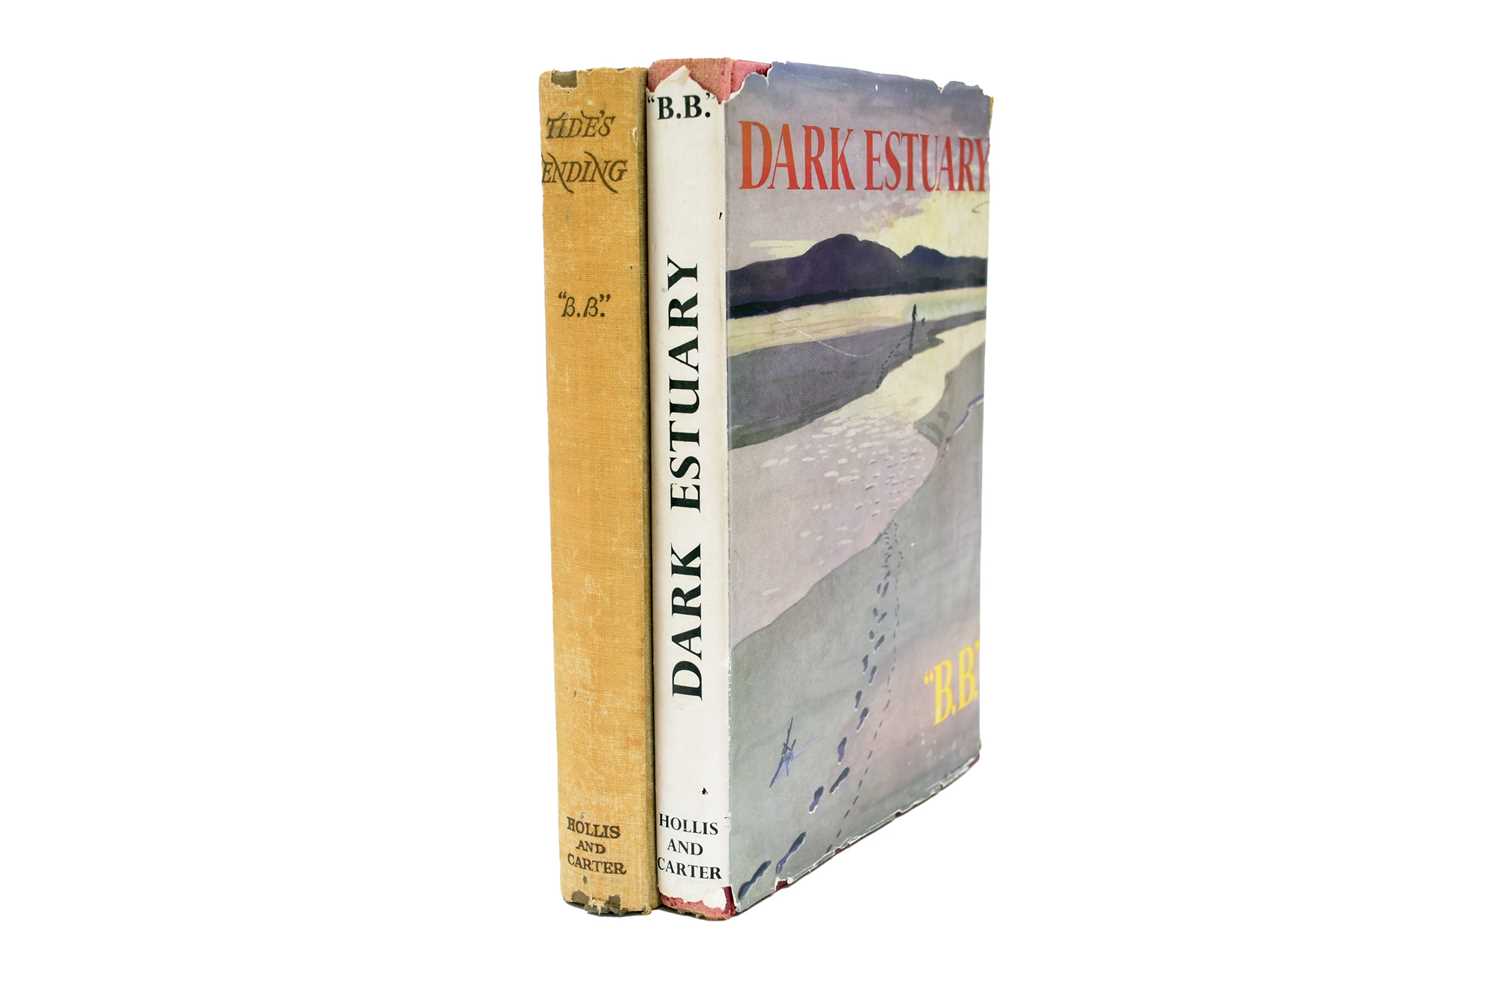 Lot 2 - 'B.B'. Dark Estuary.  1st edition 1953 in dust wrapper.  With Tide's Ending, 1st edition 1950